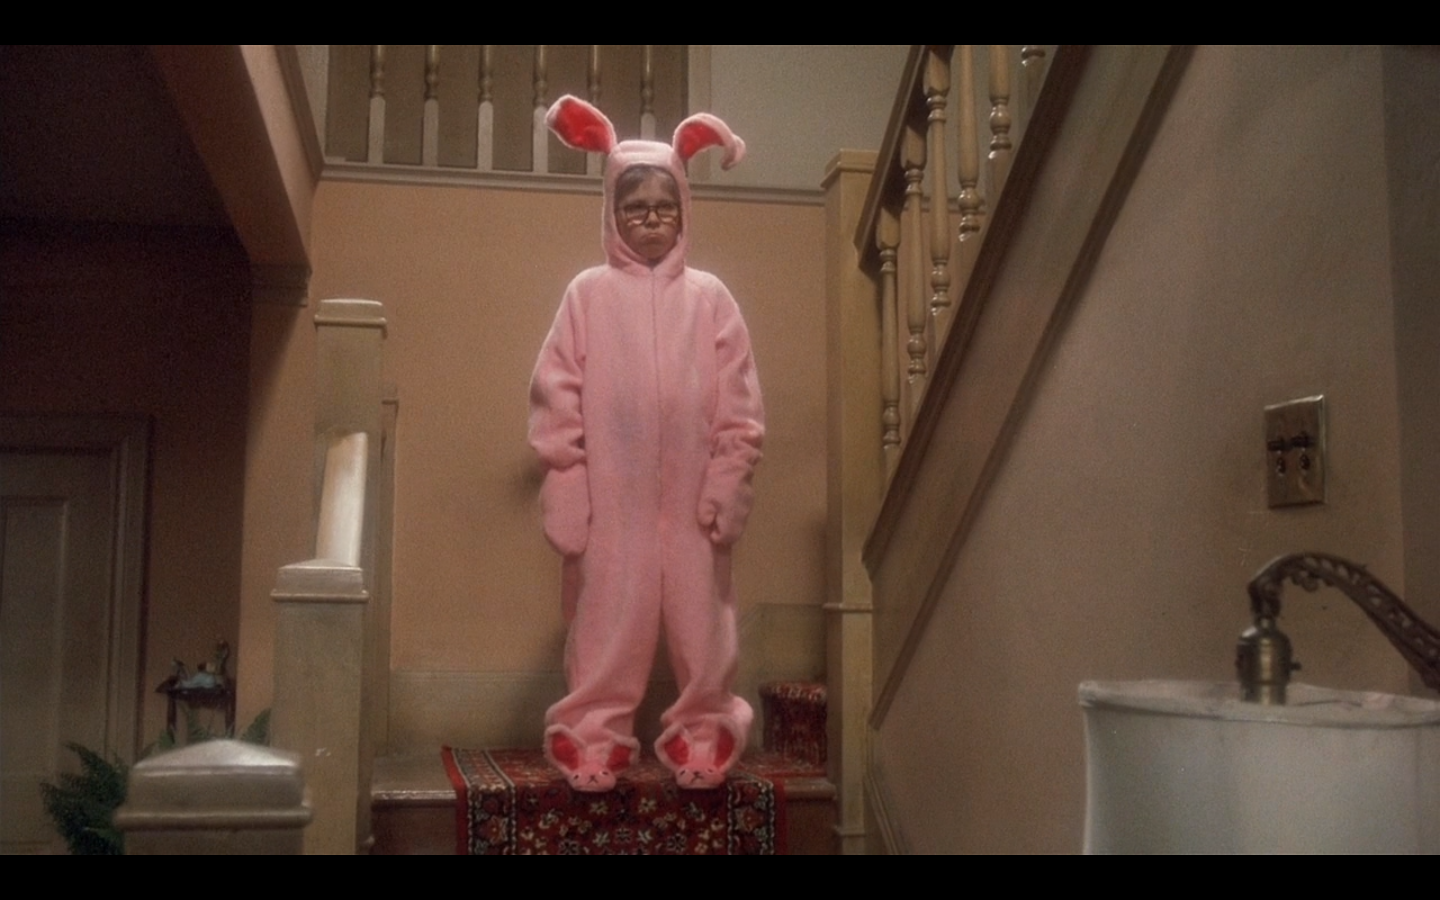 Pic of the Day: “He looks like a deranged Easter Bunny.” “He does ...